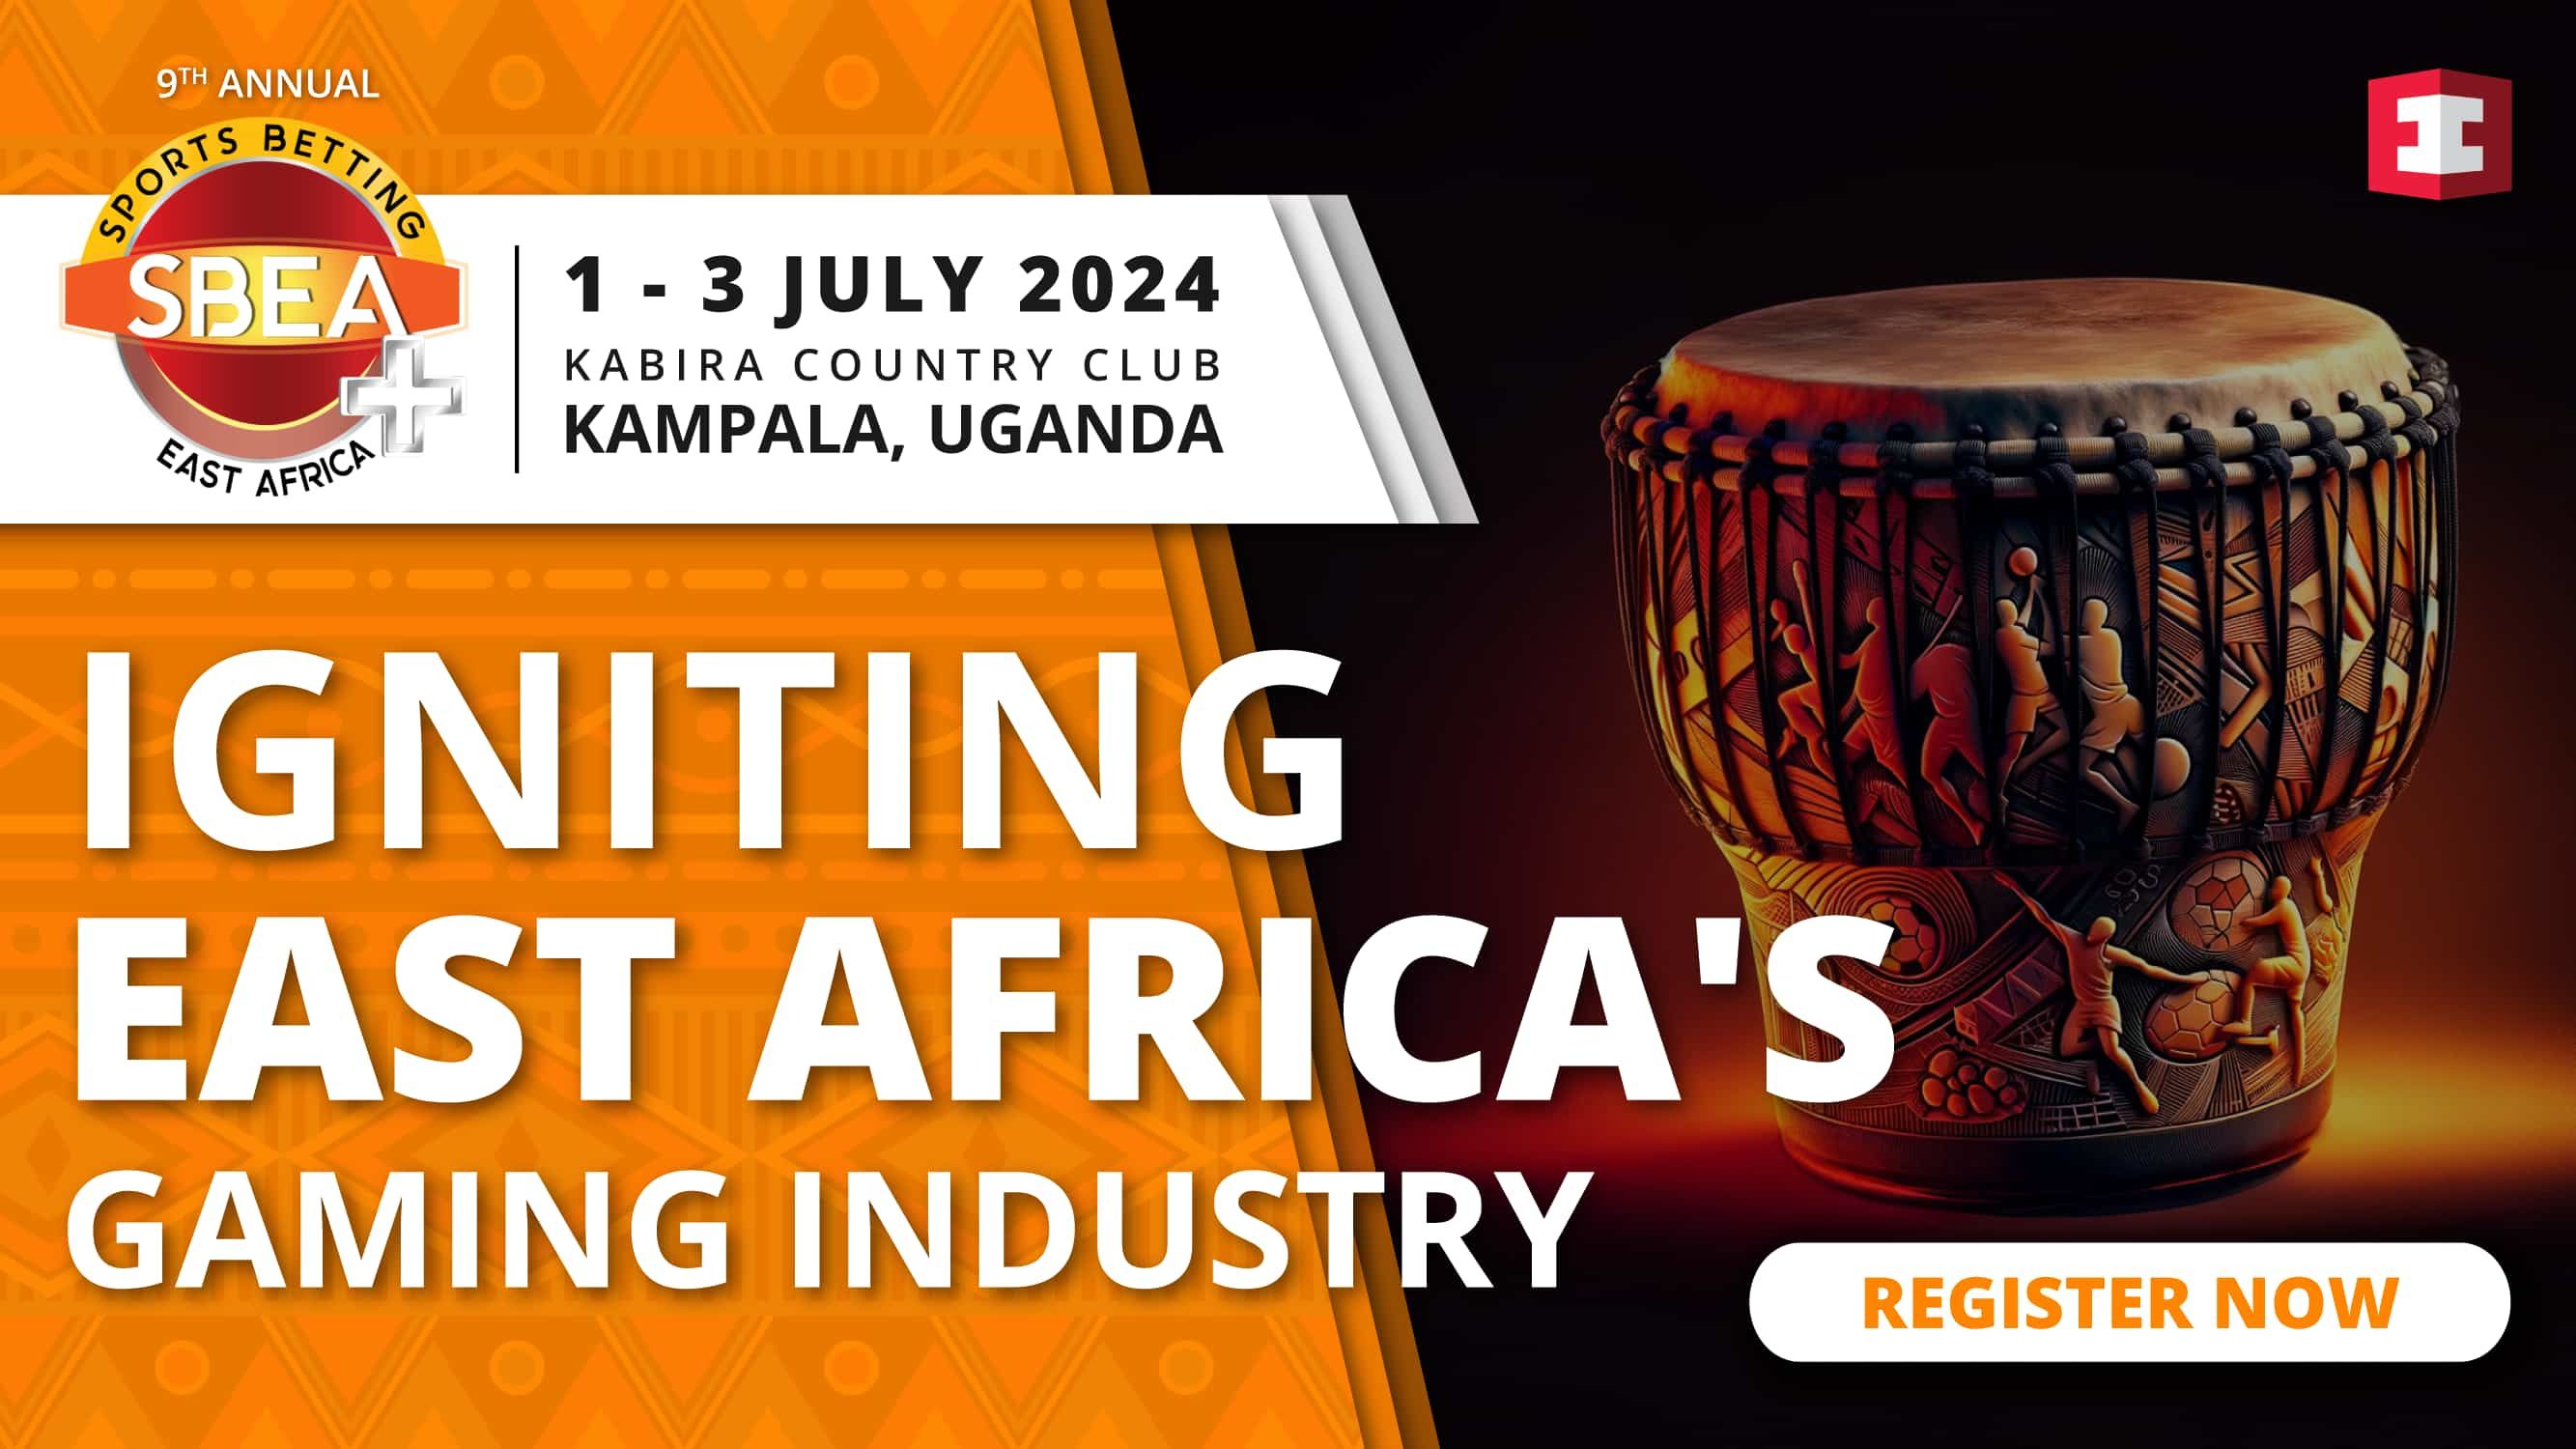 Network Amongst Leaders In East Africa - Last Chance To Book